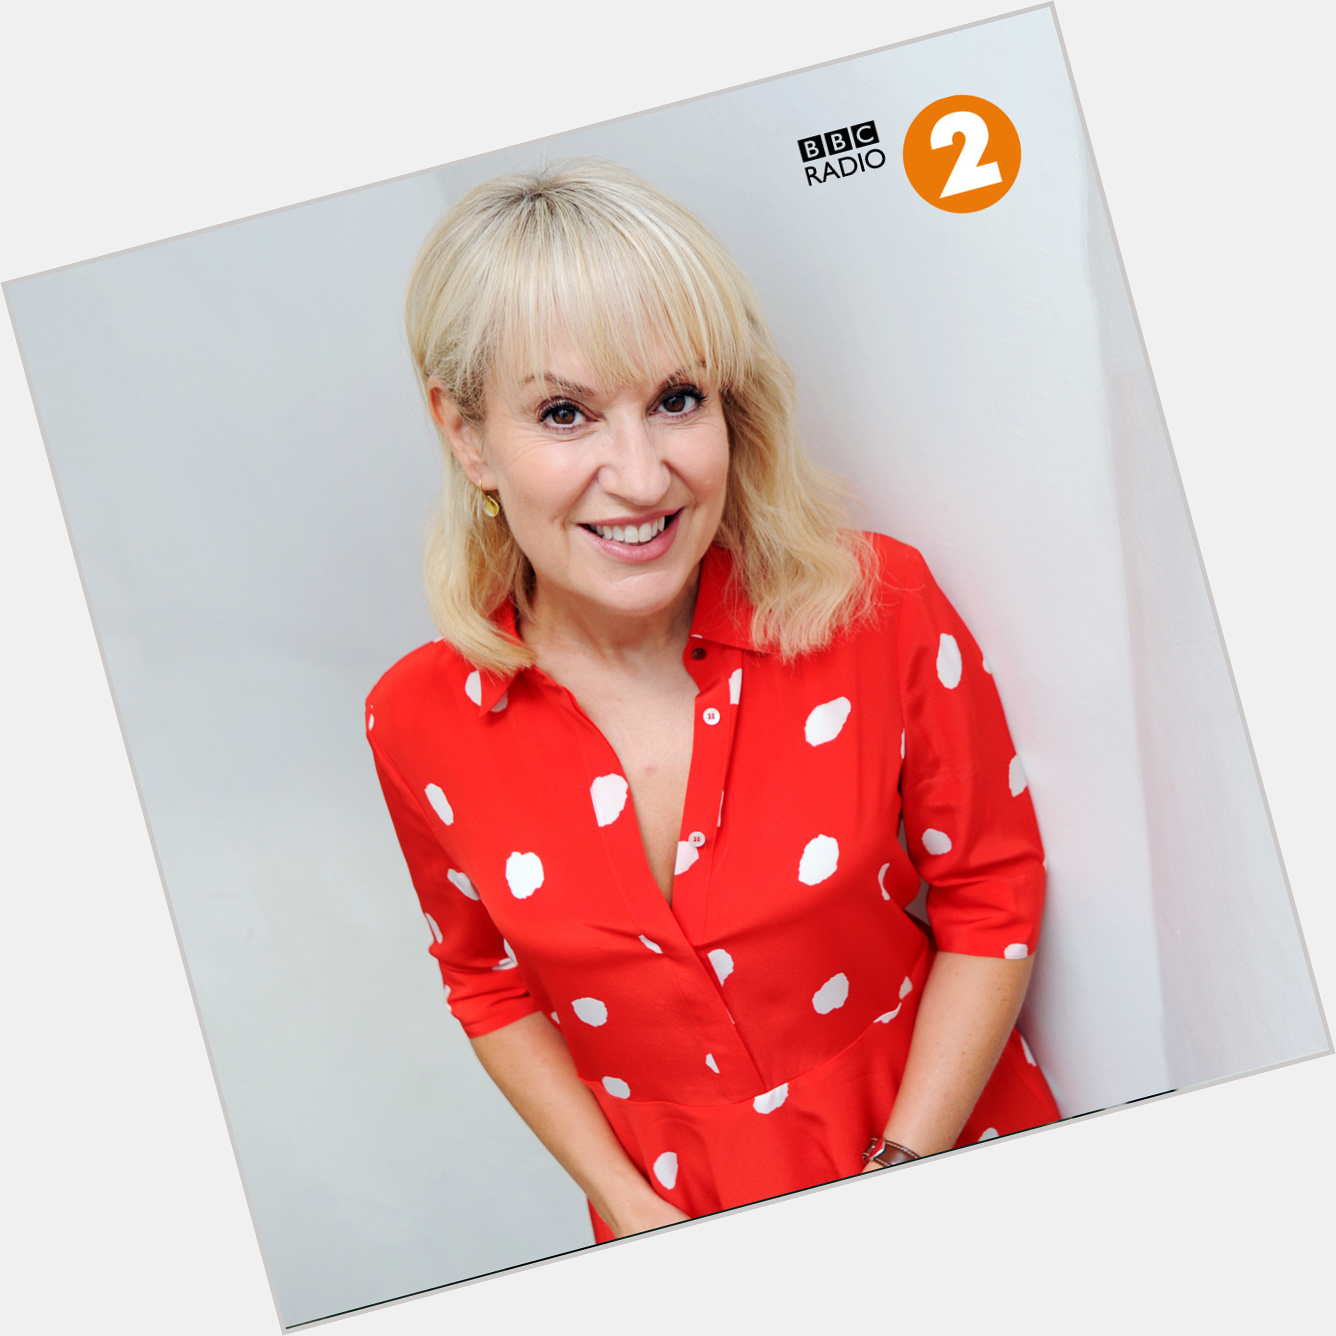 Wishing a very Happy Birthday to our wonderful Nicki Chapman! Have the best day  